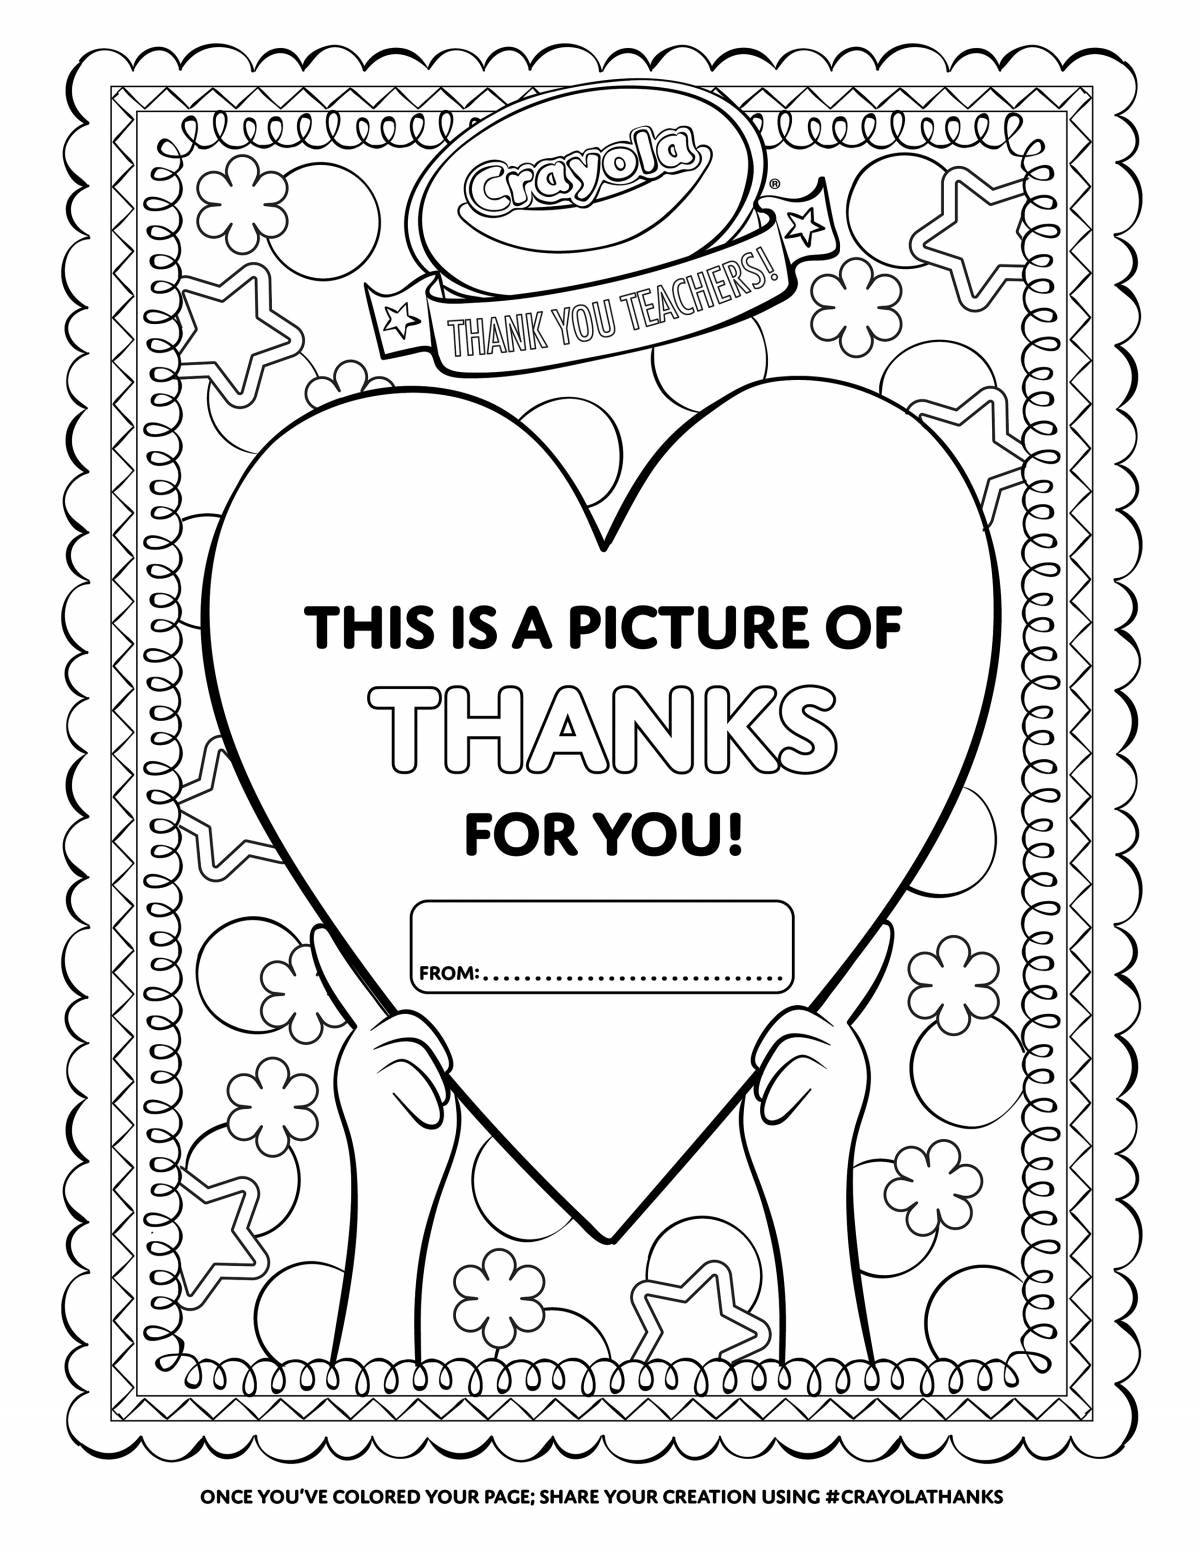 Thank you holiday coloring page